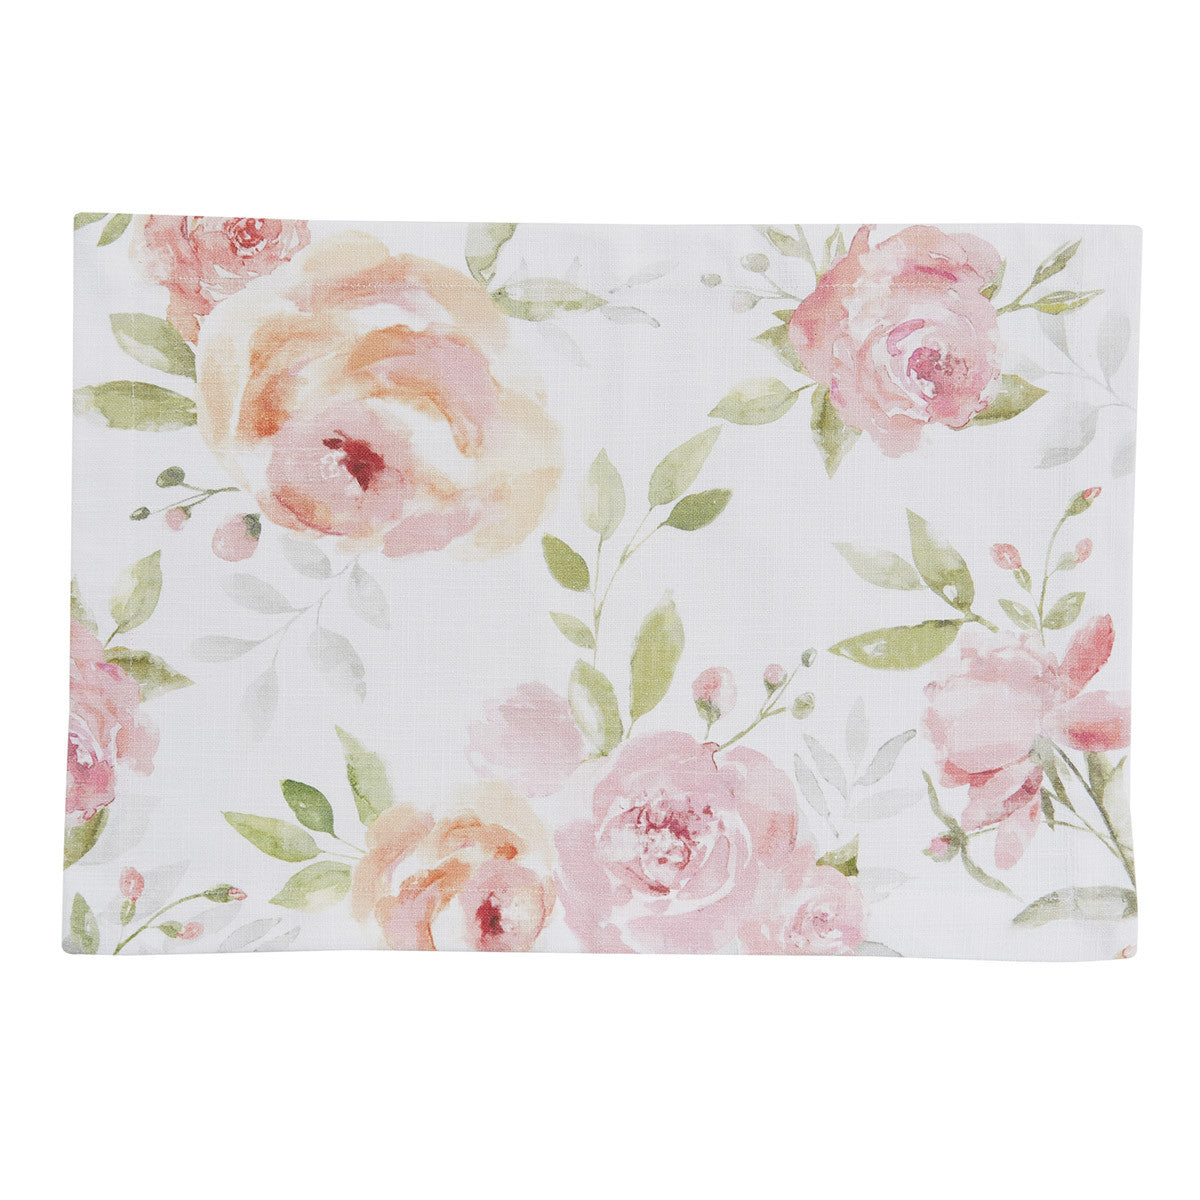 Bella Floral Table Linens - Iron Accents